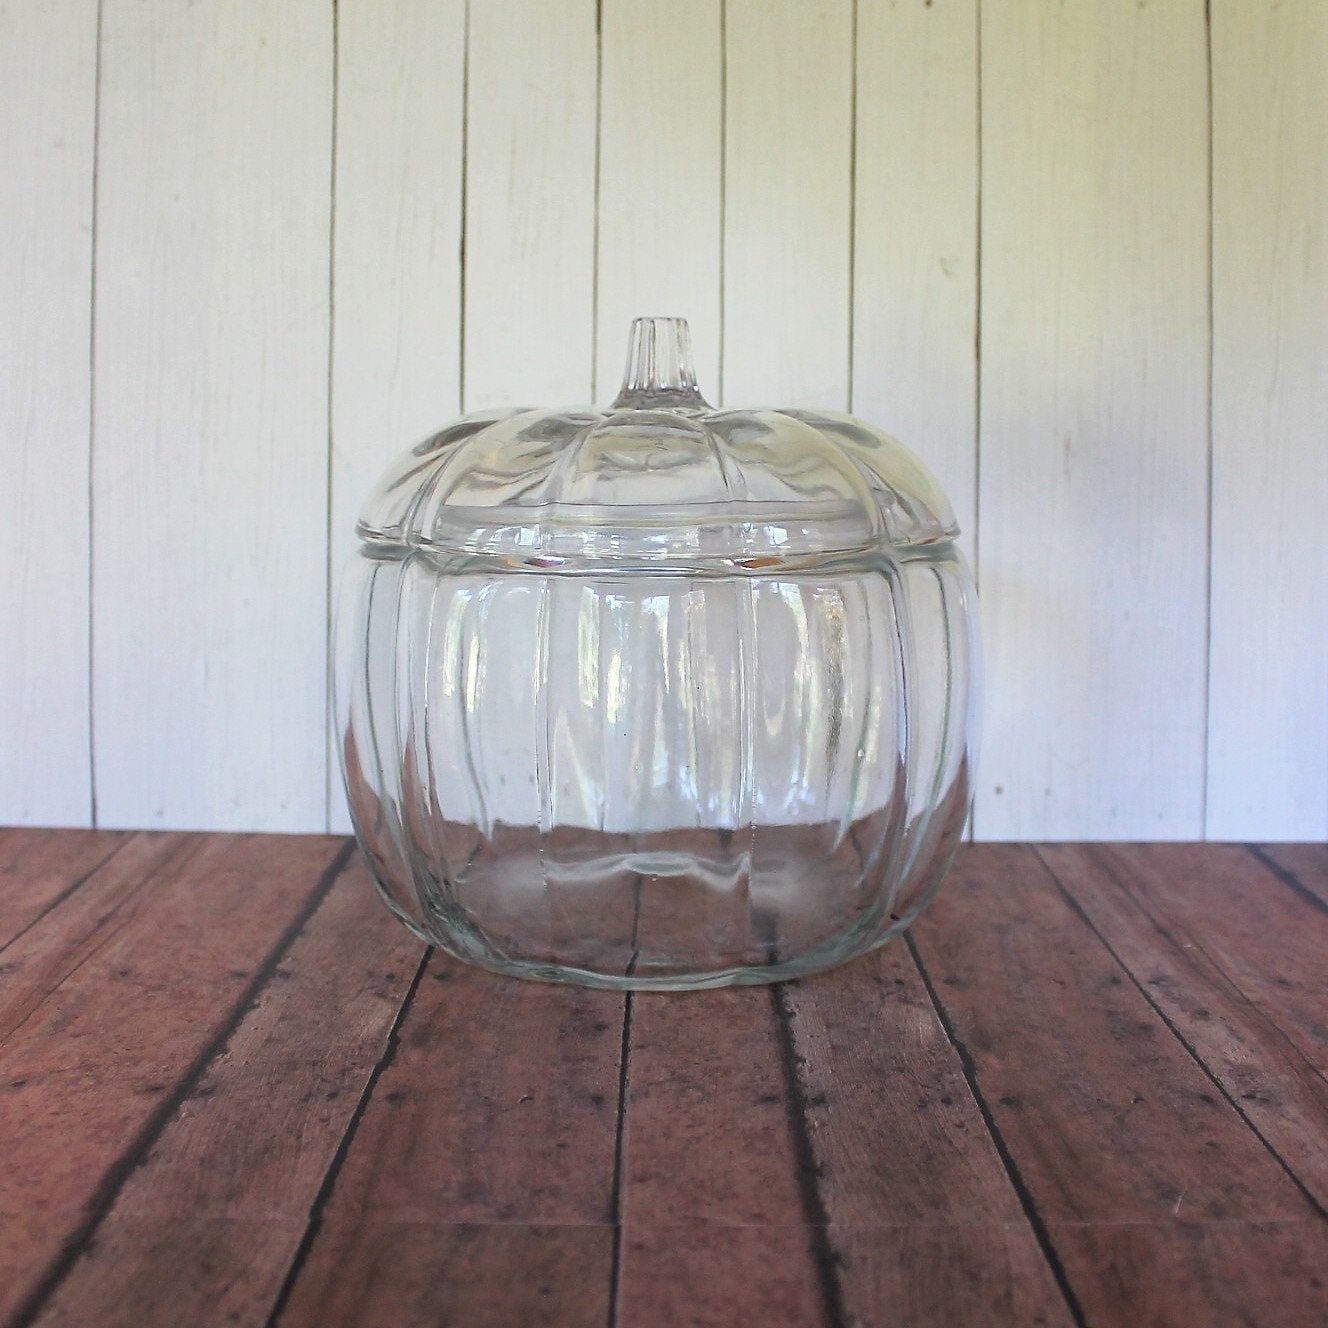 Vintage Large Glass Pumpkin Bowl Candy Dish with Lid Clear Glass Cookie Jar  Anchor Hocking Fall Halloween Thanksgiving Decor